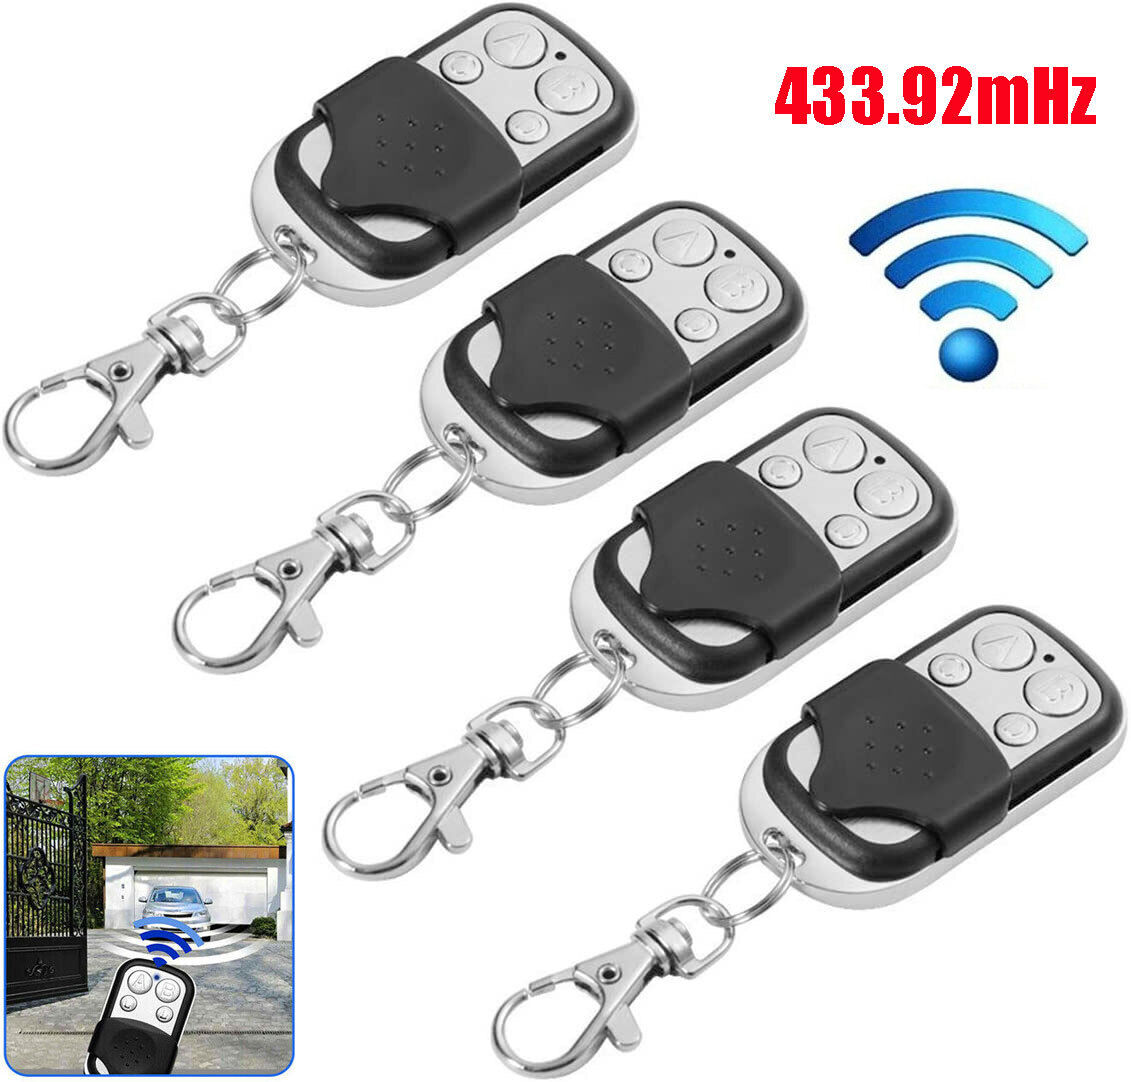 4x Universal Electric Cloning Remote Control Key Fob 433MHz For Gate Garage Door Unbranded Does Not Apply